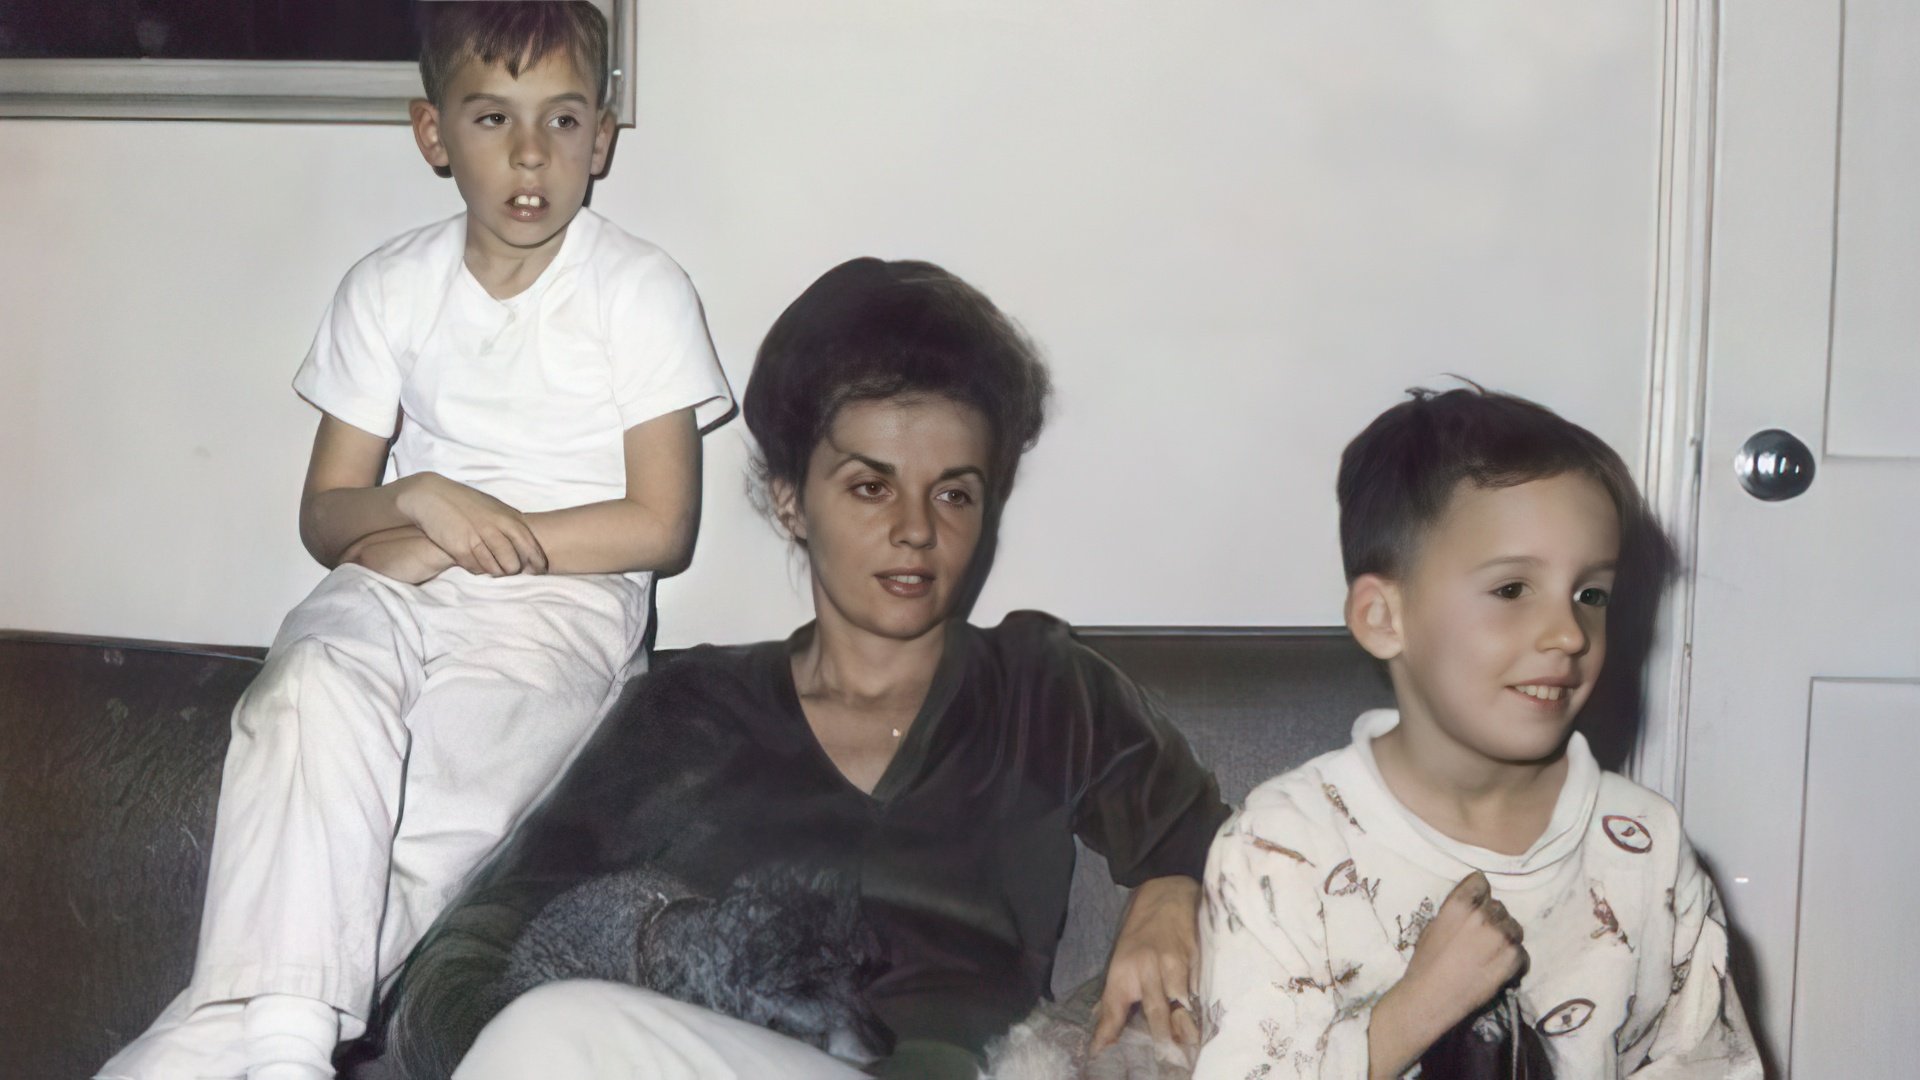 Tim Burton in childhood with his mother and younger brother